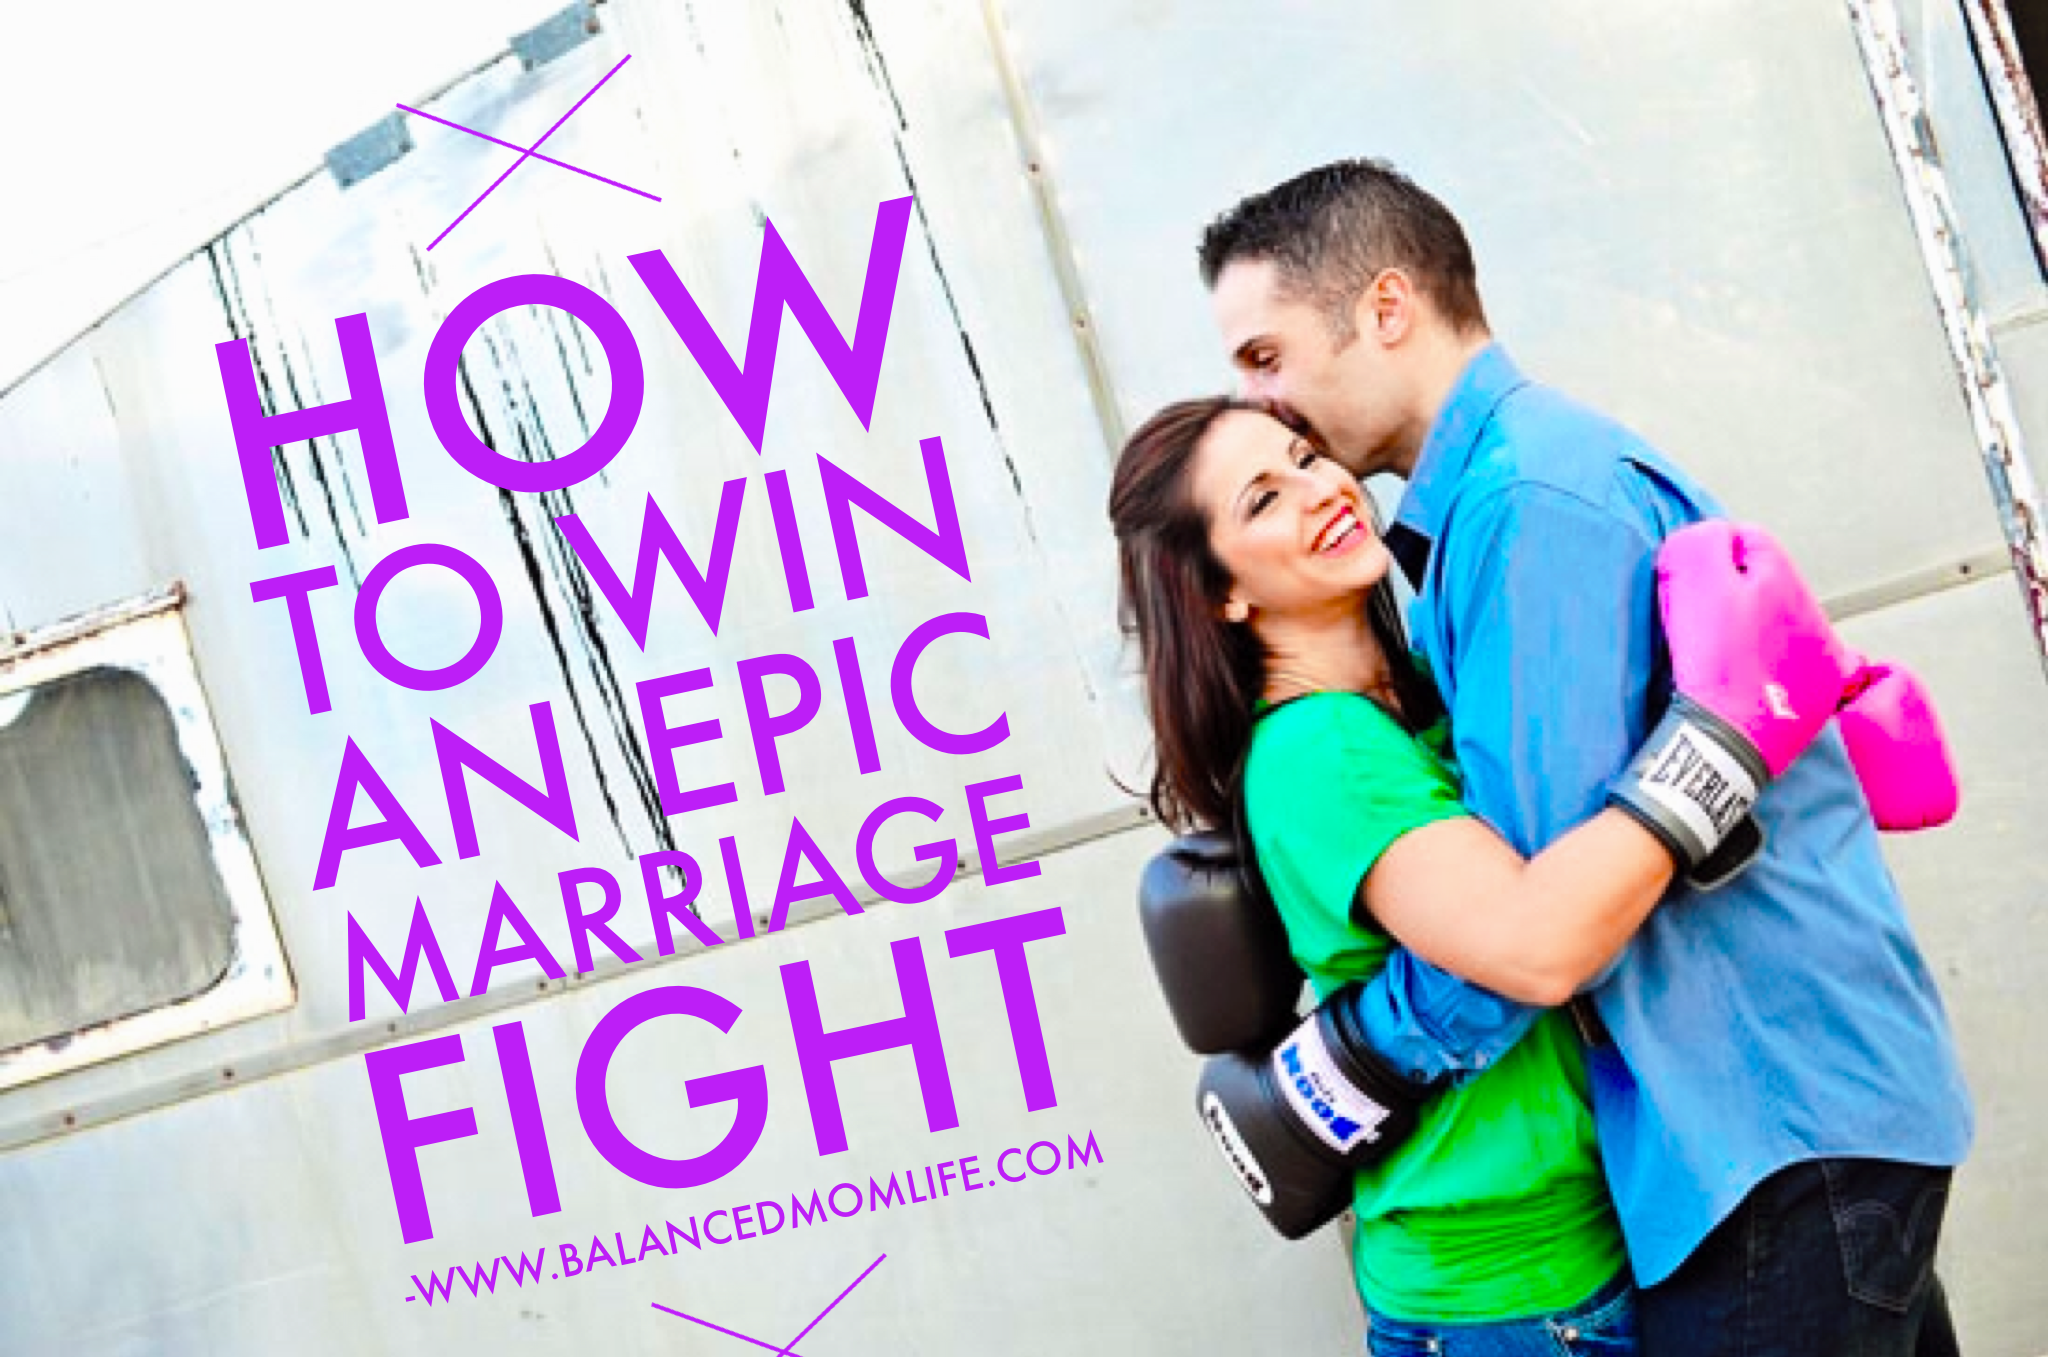 win an epic marriage fight